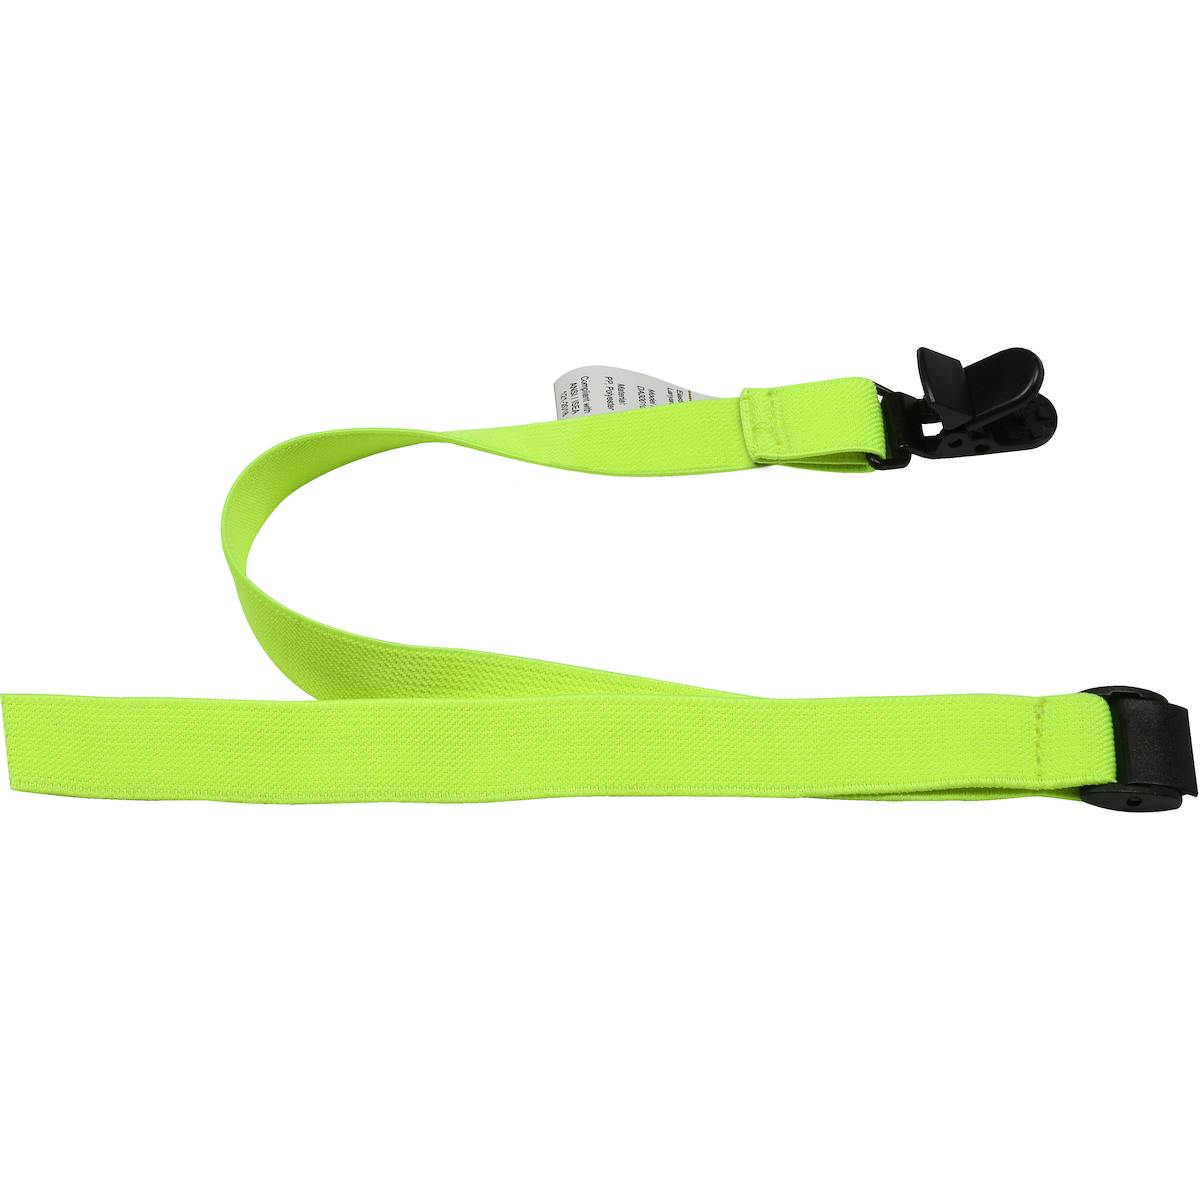 Hard Hat Lanyard - 2 lbs. maximum load limit - Retail Packaged, Lime (533-300101) - OS_1